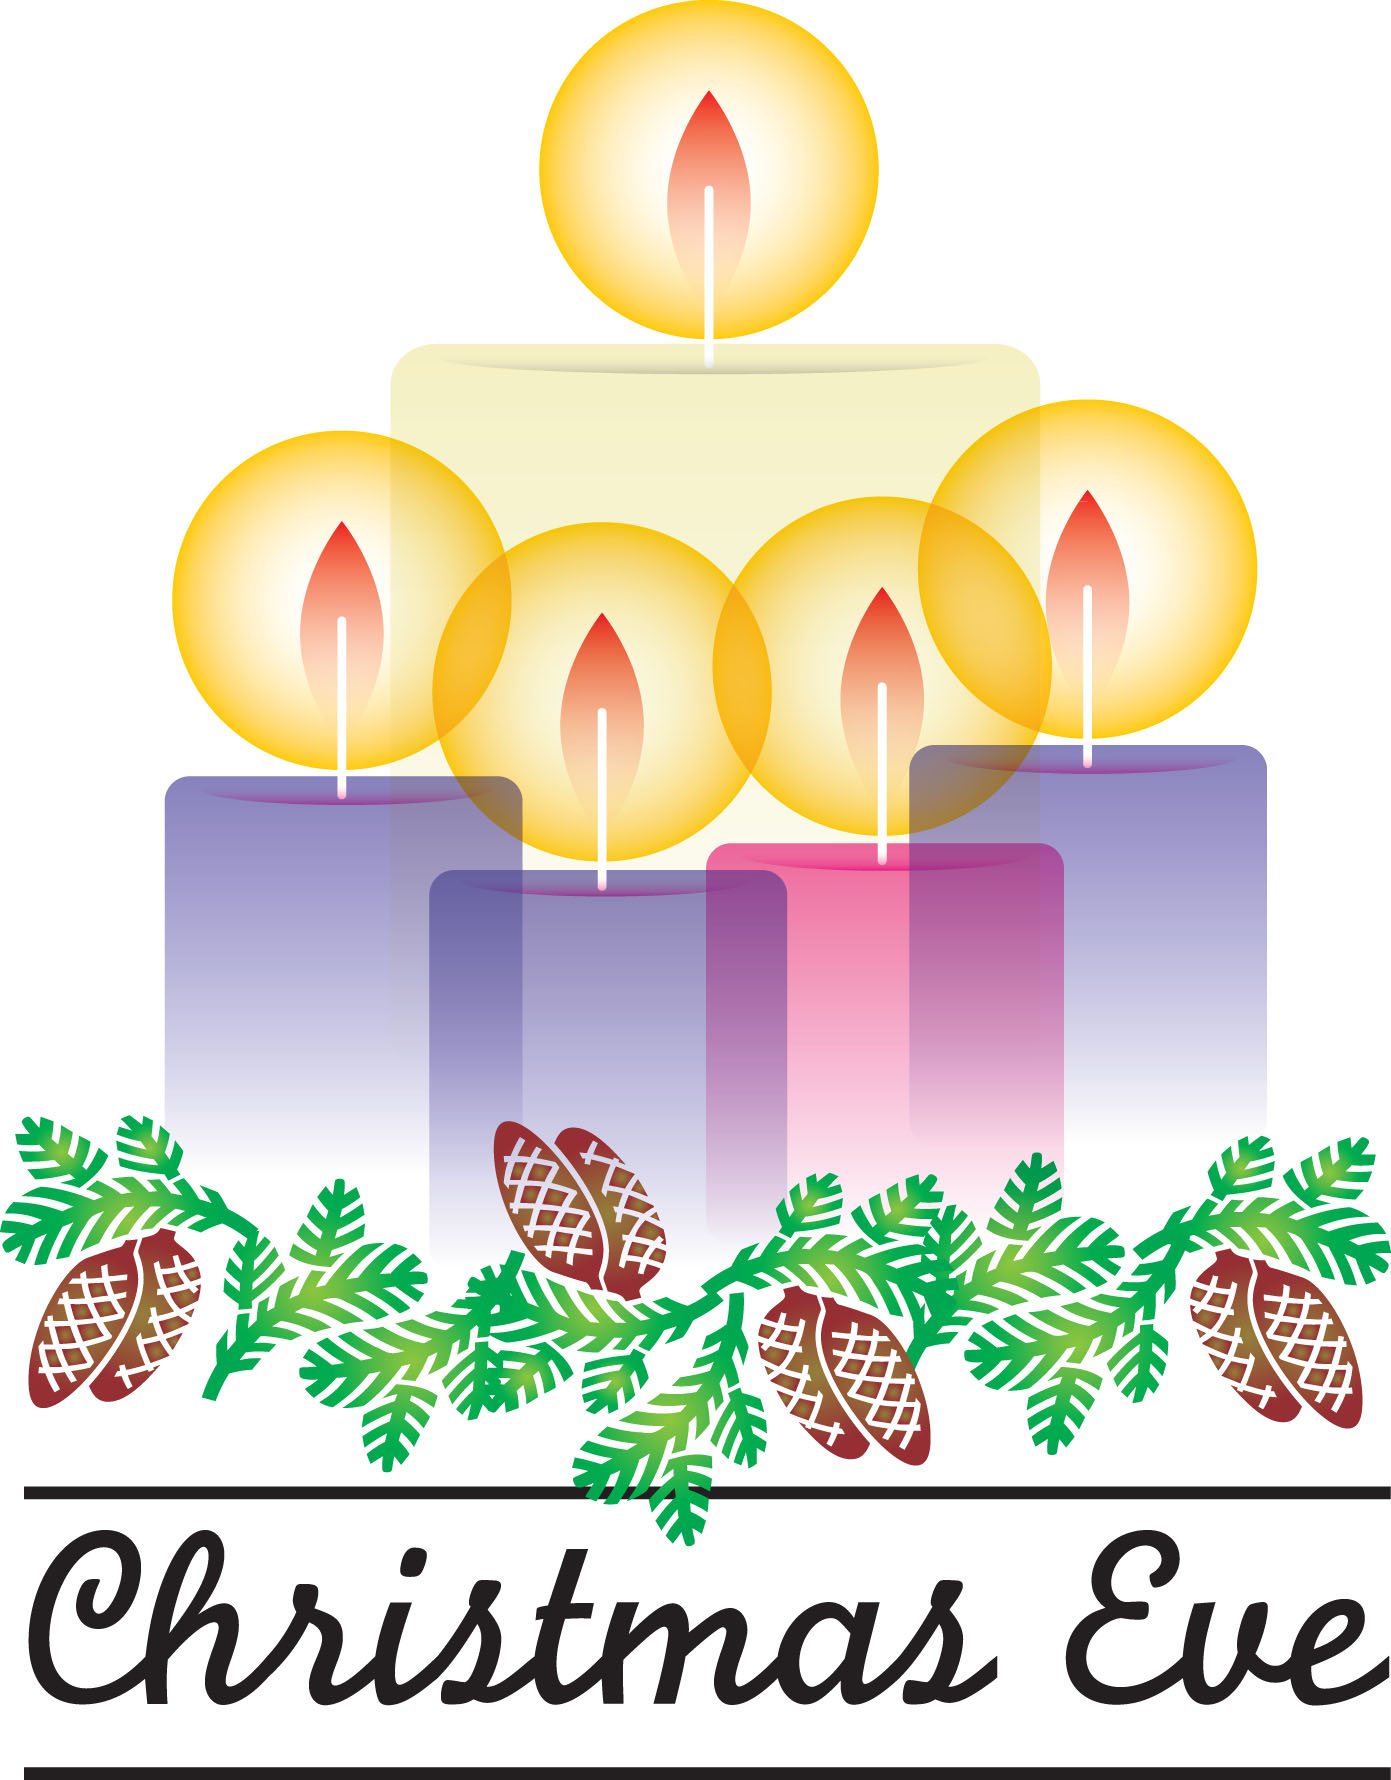 candlelight service clipart 20 free Cliparts | Download images on ...